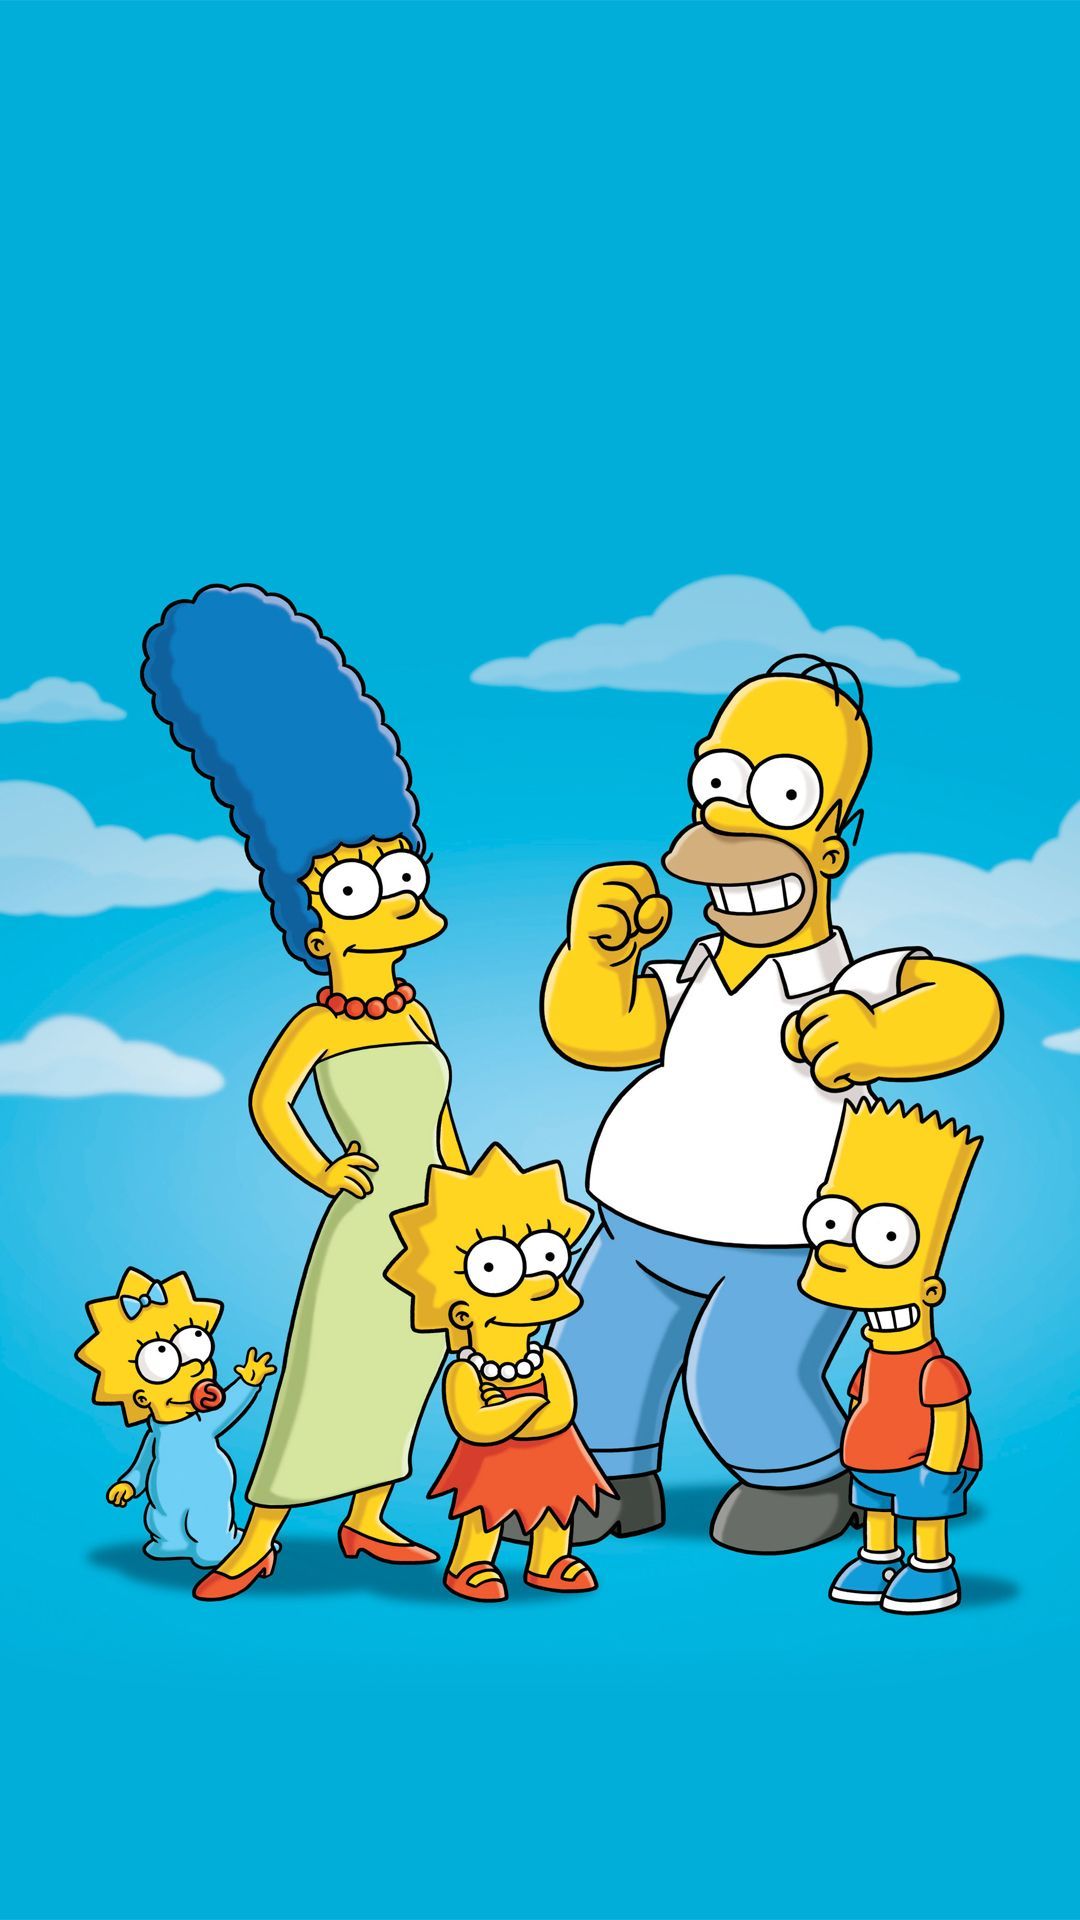 The Simpsons. Set. HD. Mobile Wallpaper Image